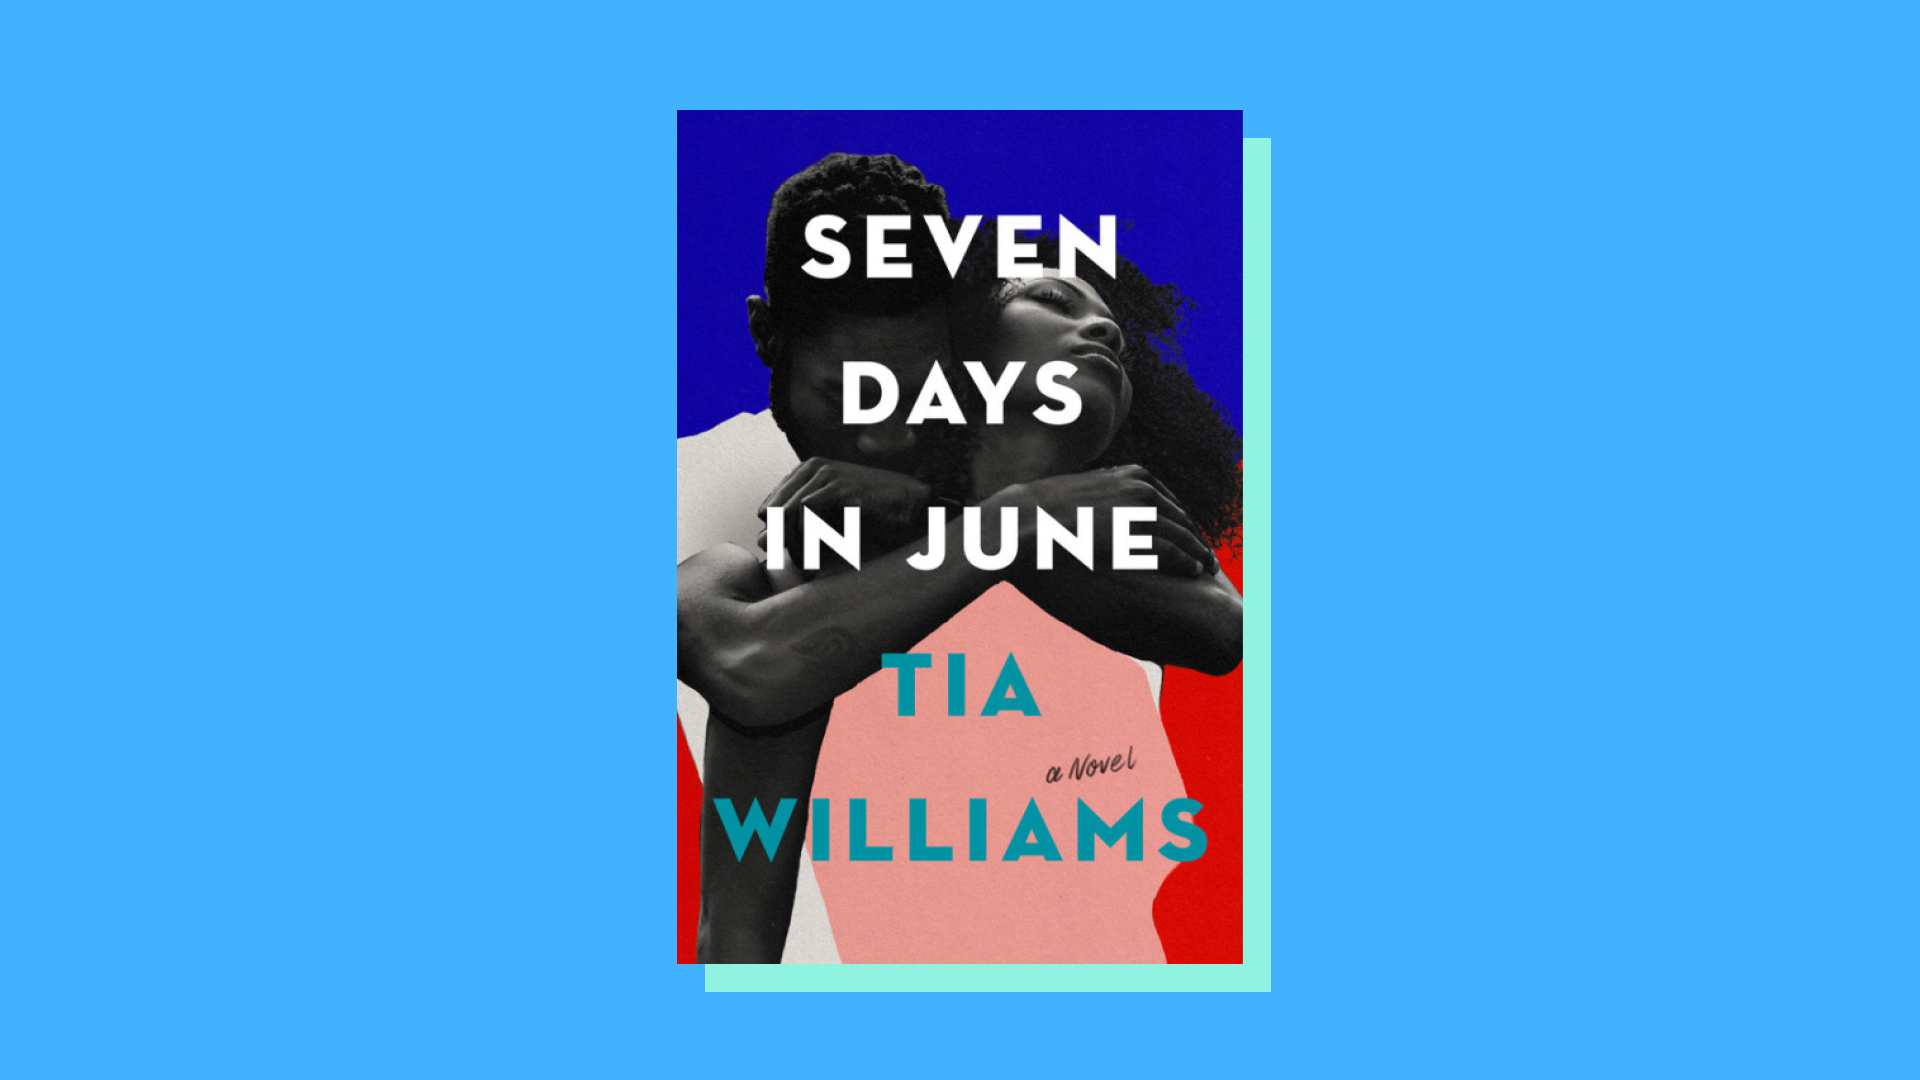 “Seven Days in June” by Tia Williams 